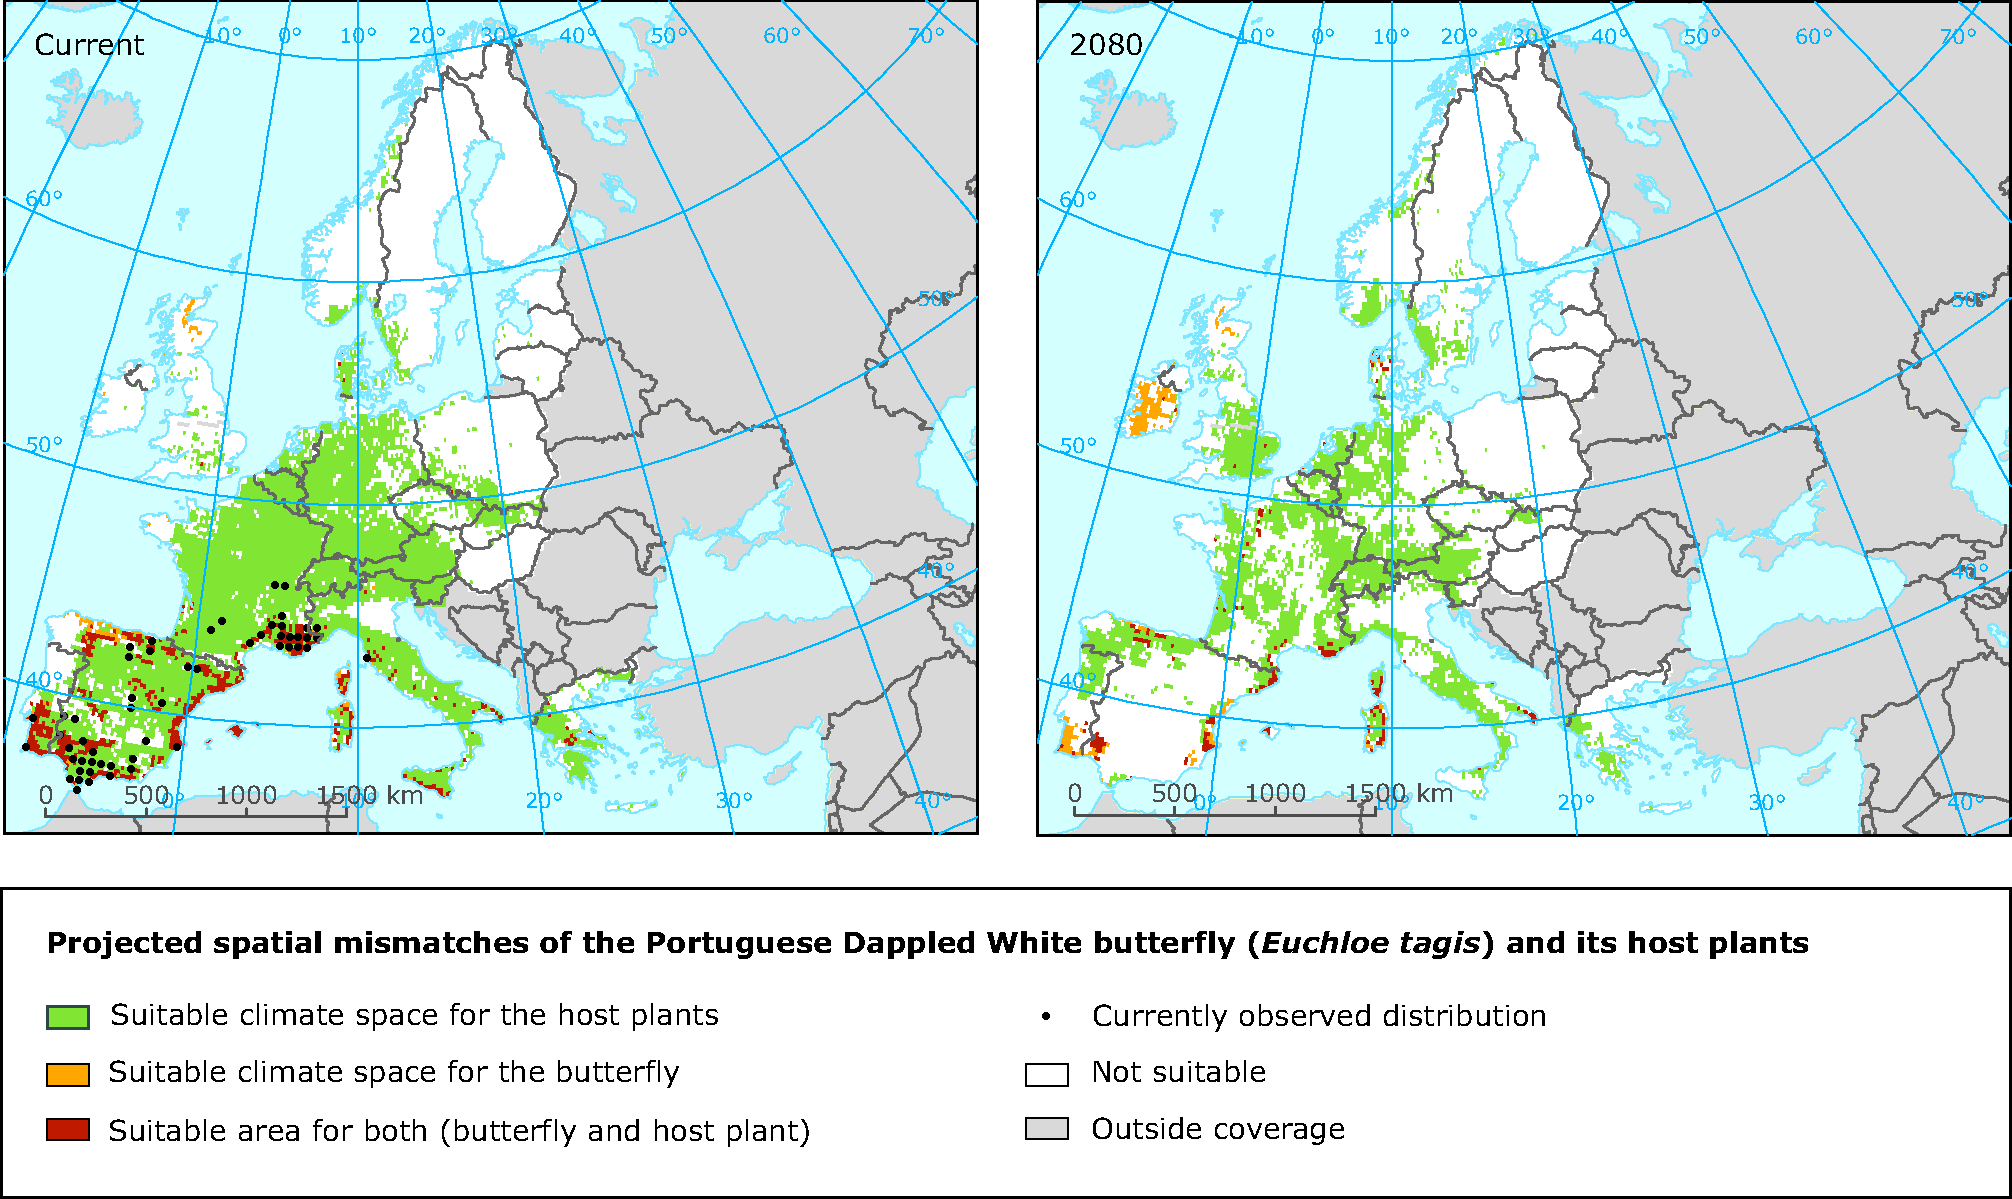 Projected spatial mismatches of the Portuguese Dappled White butterfly and its host plants